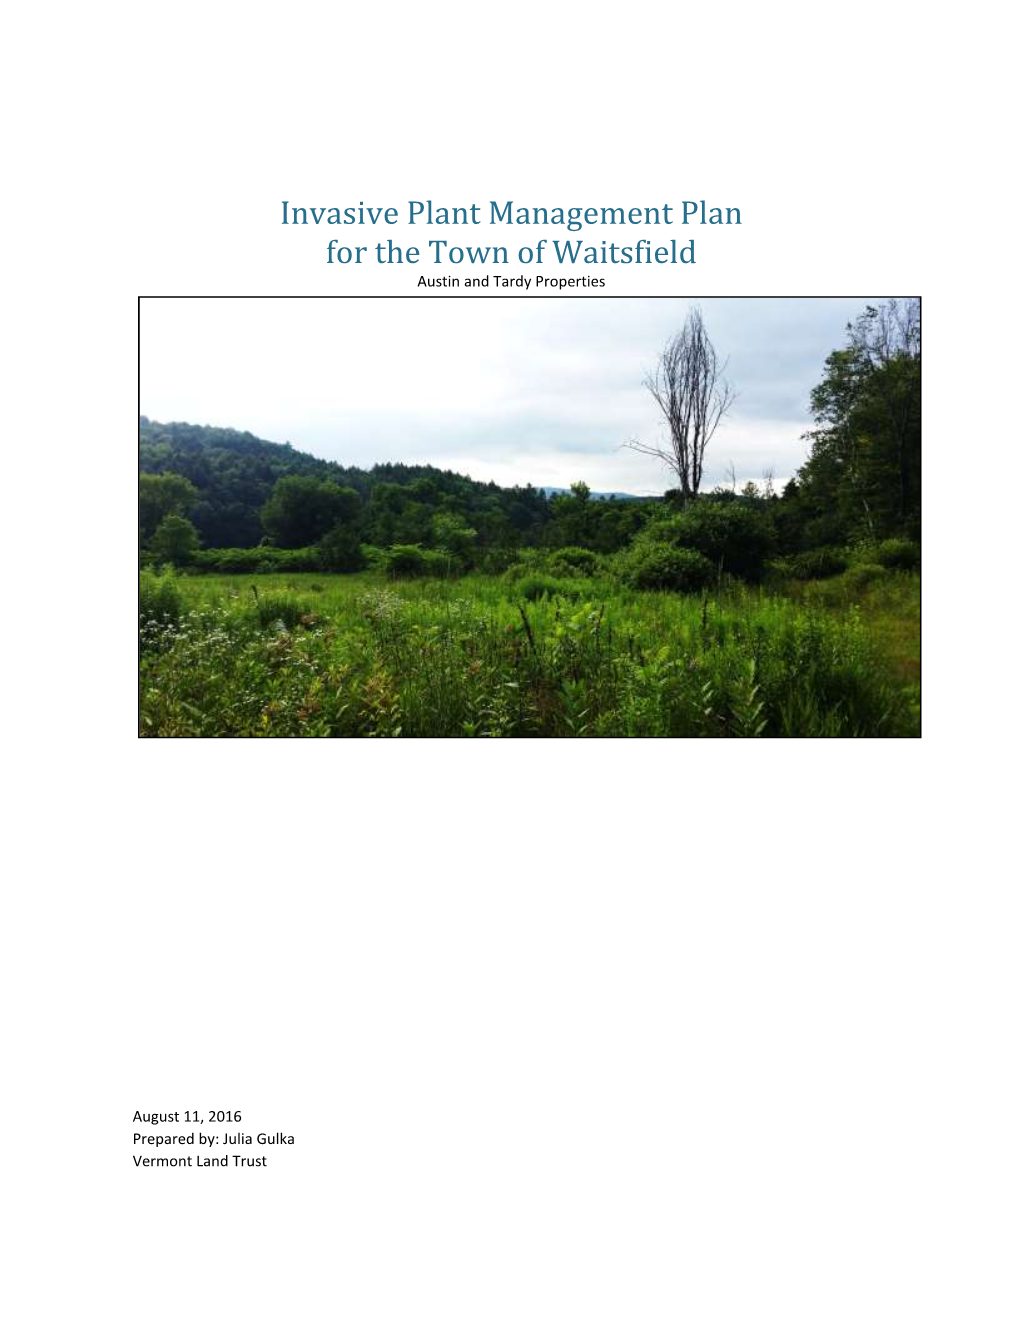 Invasive Plant Management Plan for the Town Of